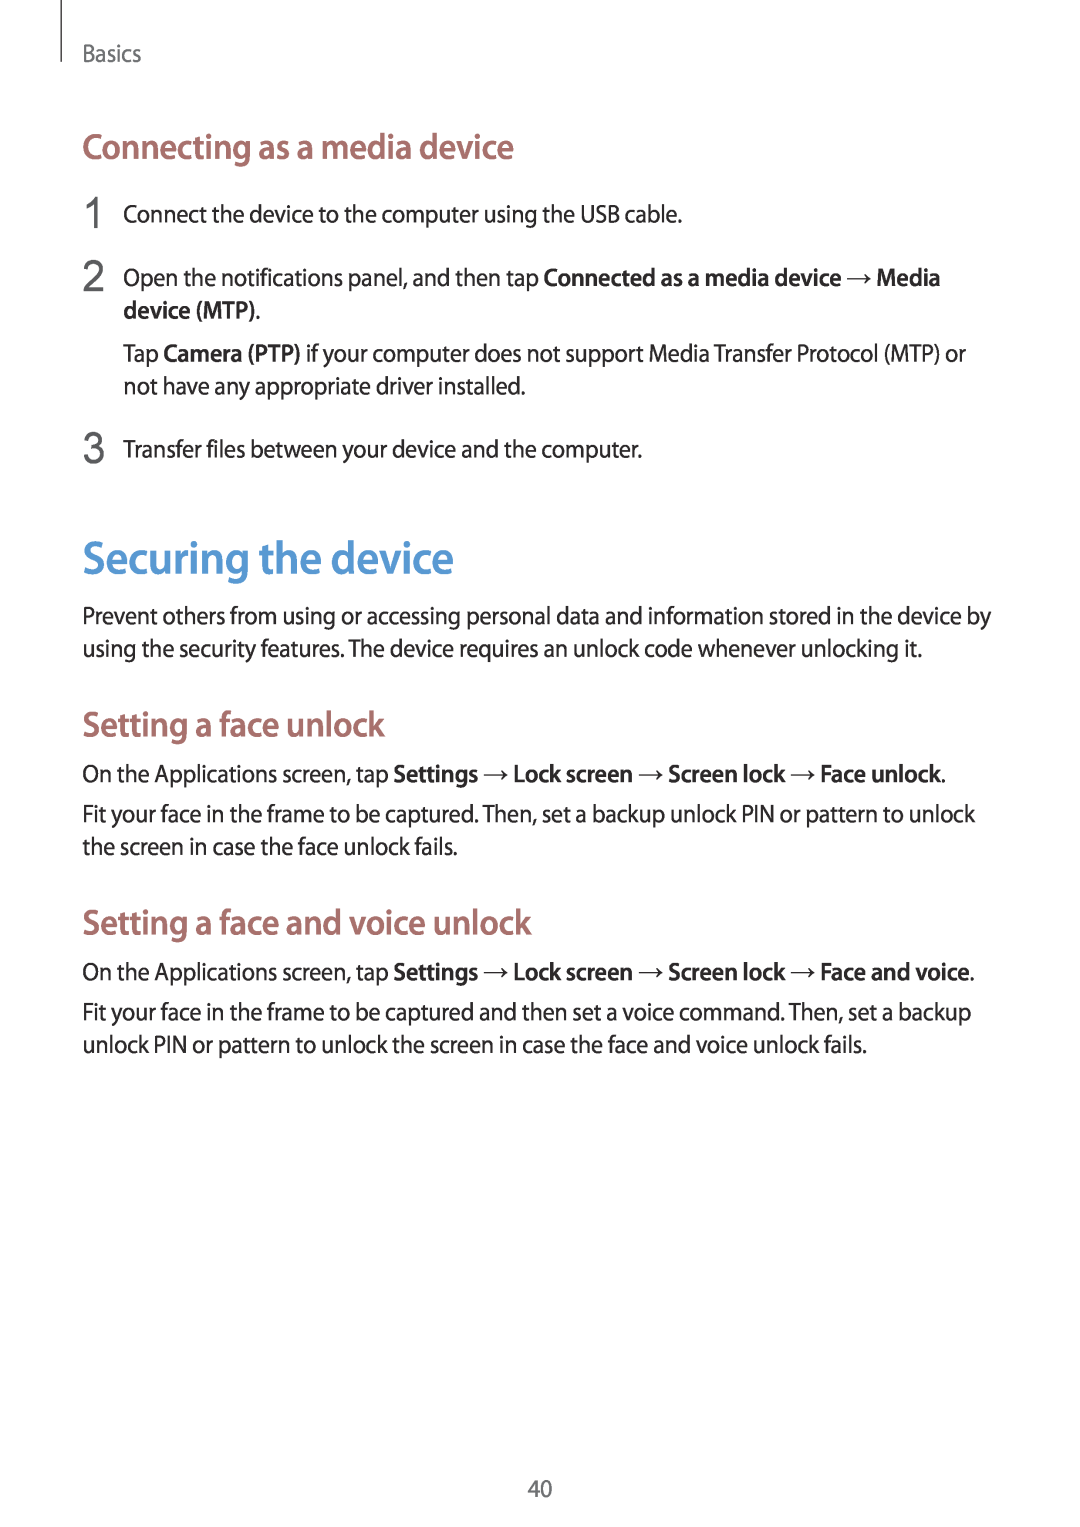 Samsung SM-T3150ZWAXEZ manual Securing the device, Connecting as a media device, Setting a face unlock, device MTP, Basics 